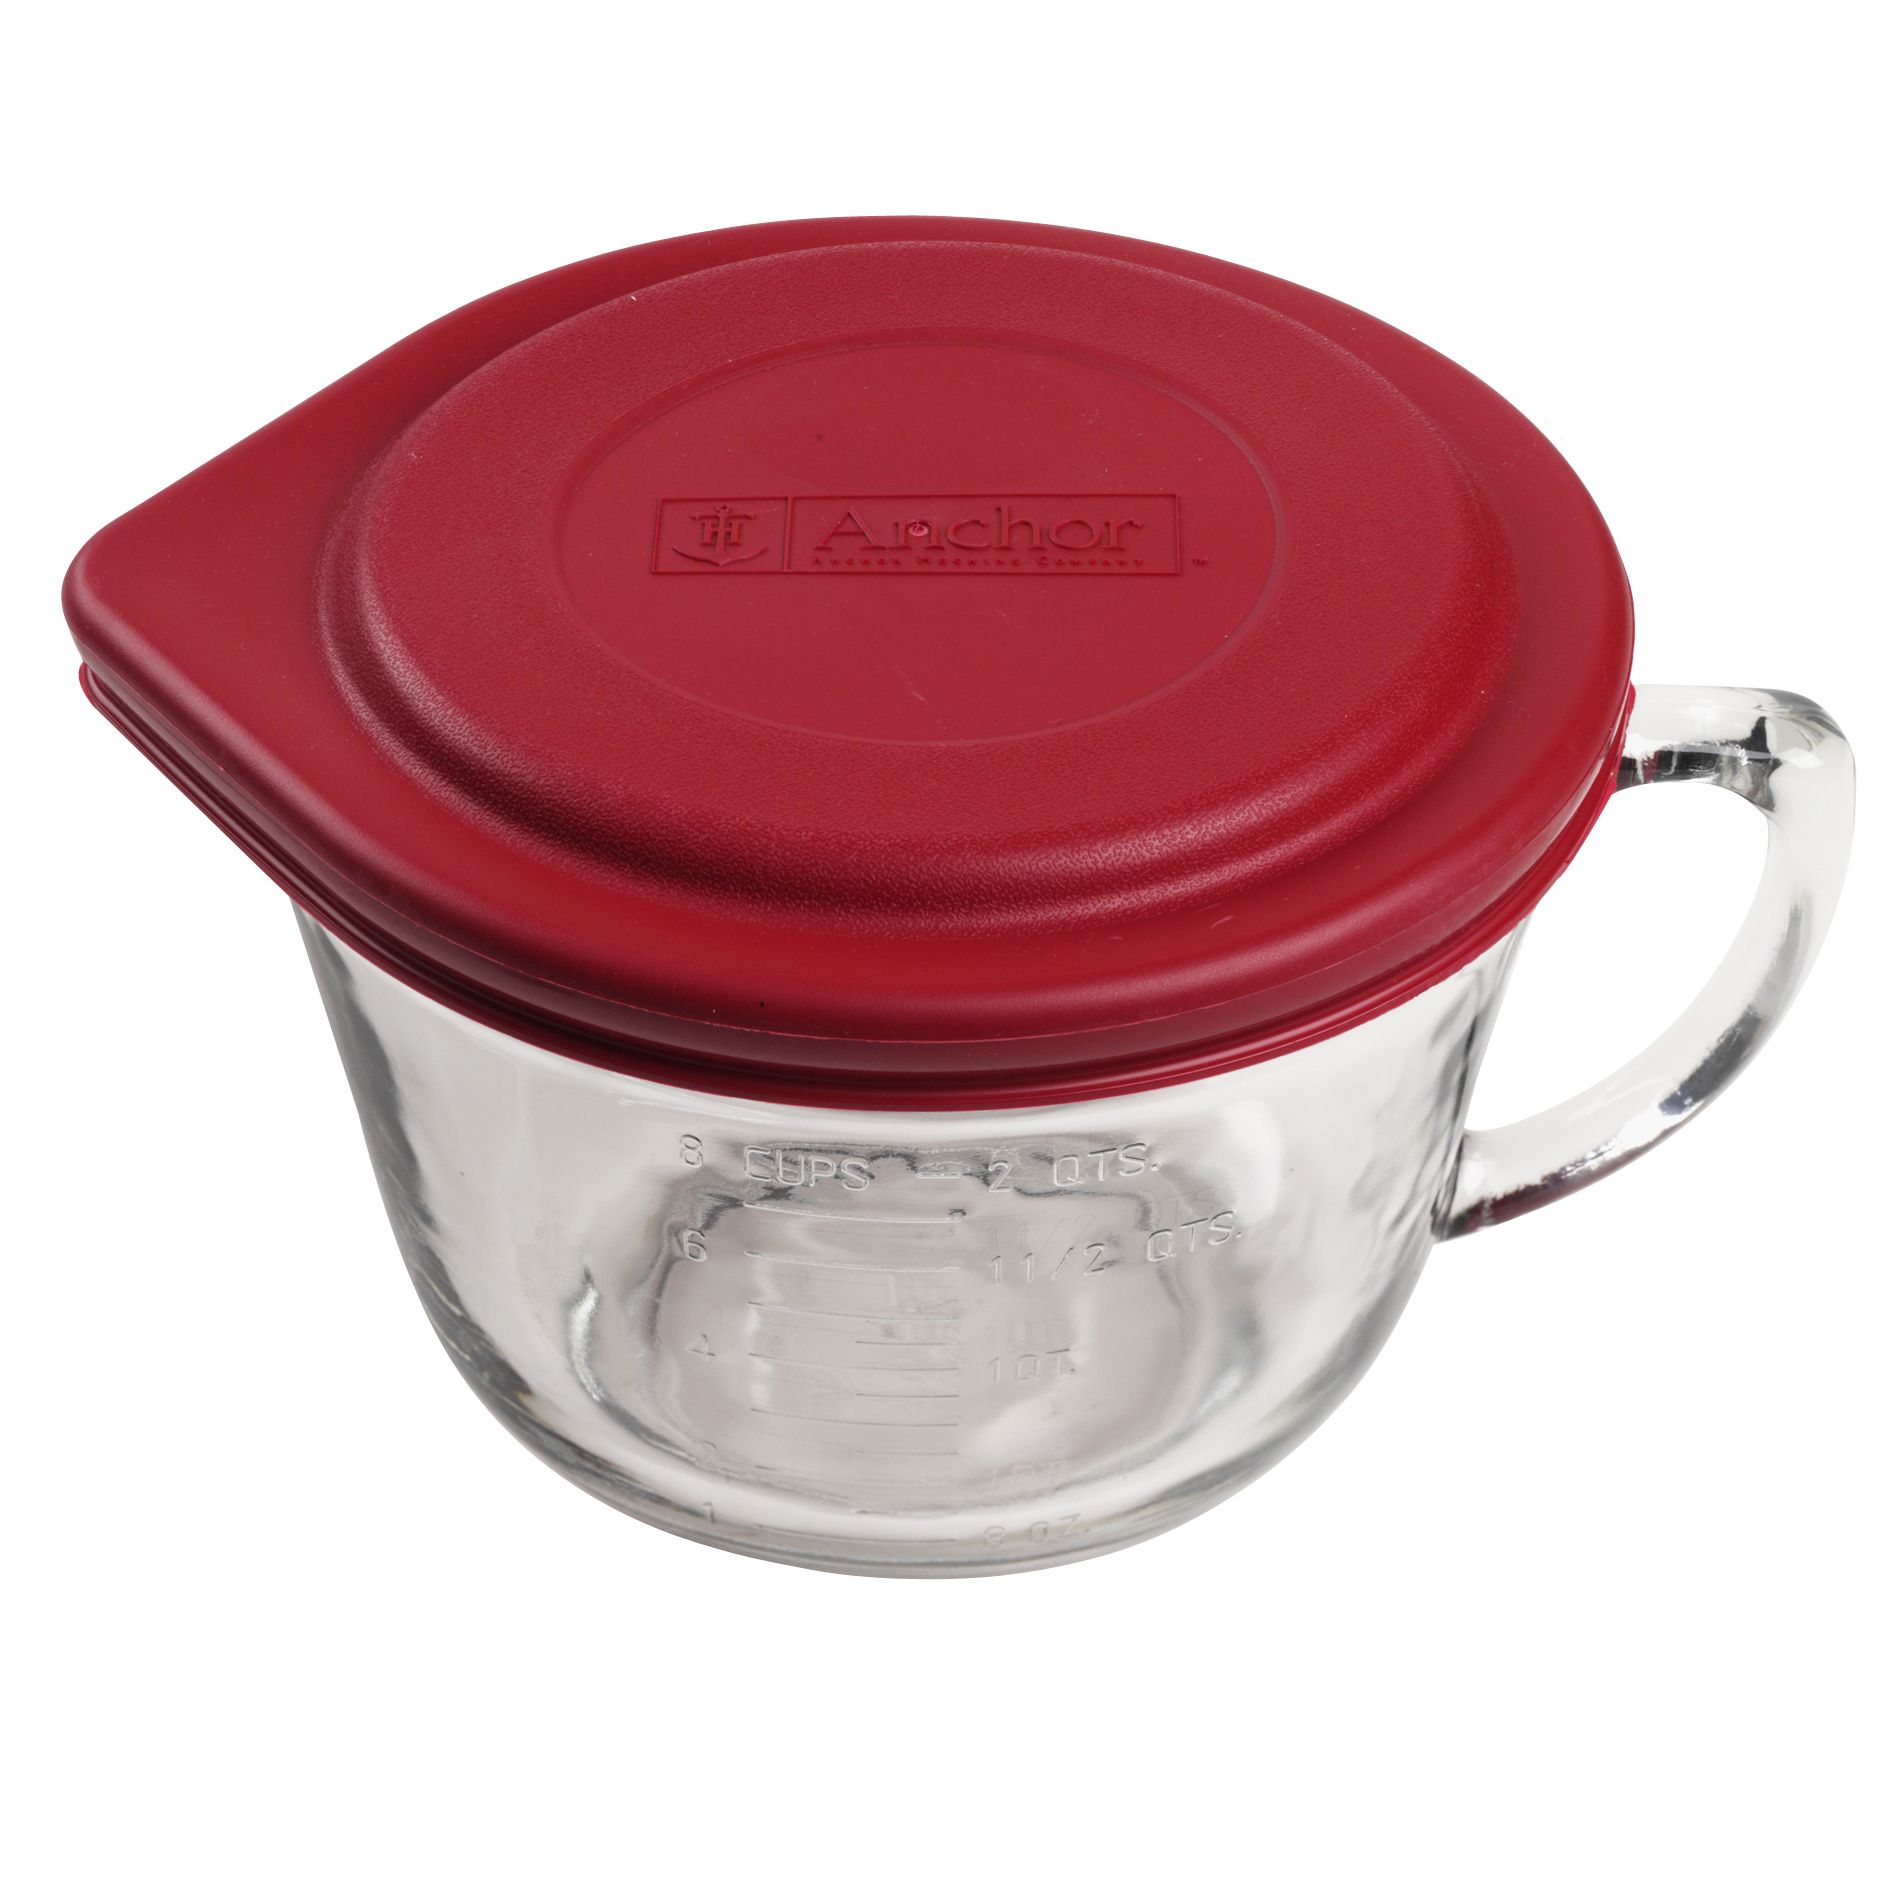 Anchor Hocking 2 Qt. Batter Bowl with Red Lid - Browns Kitchen